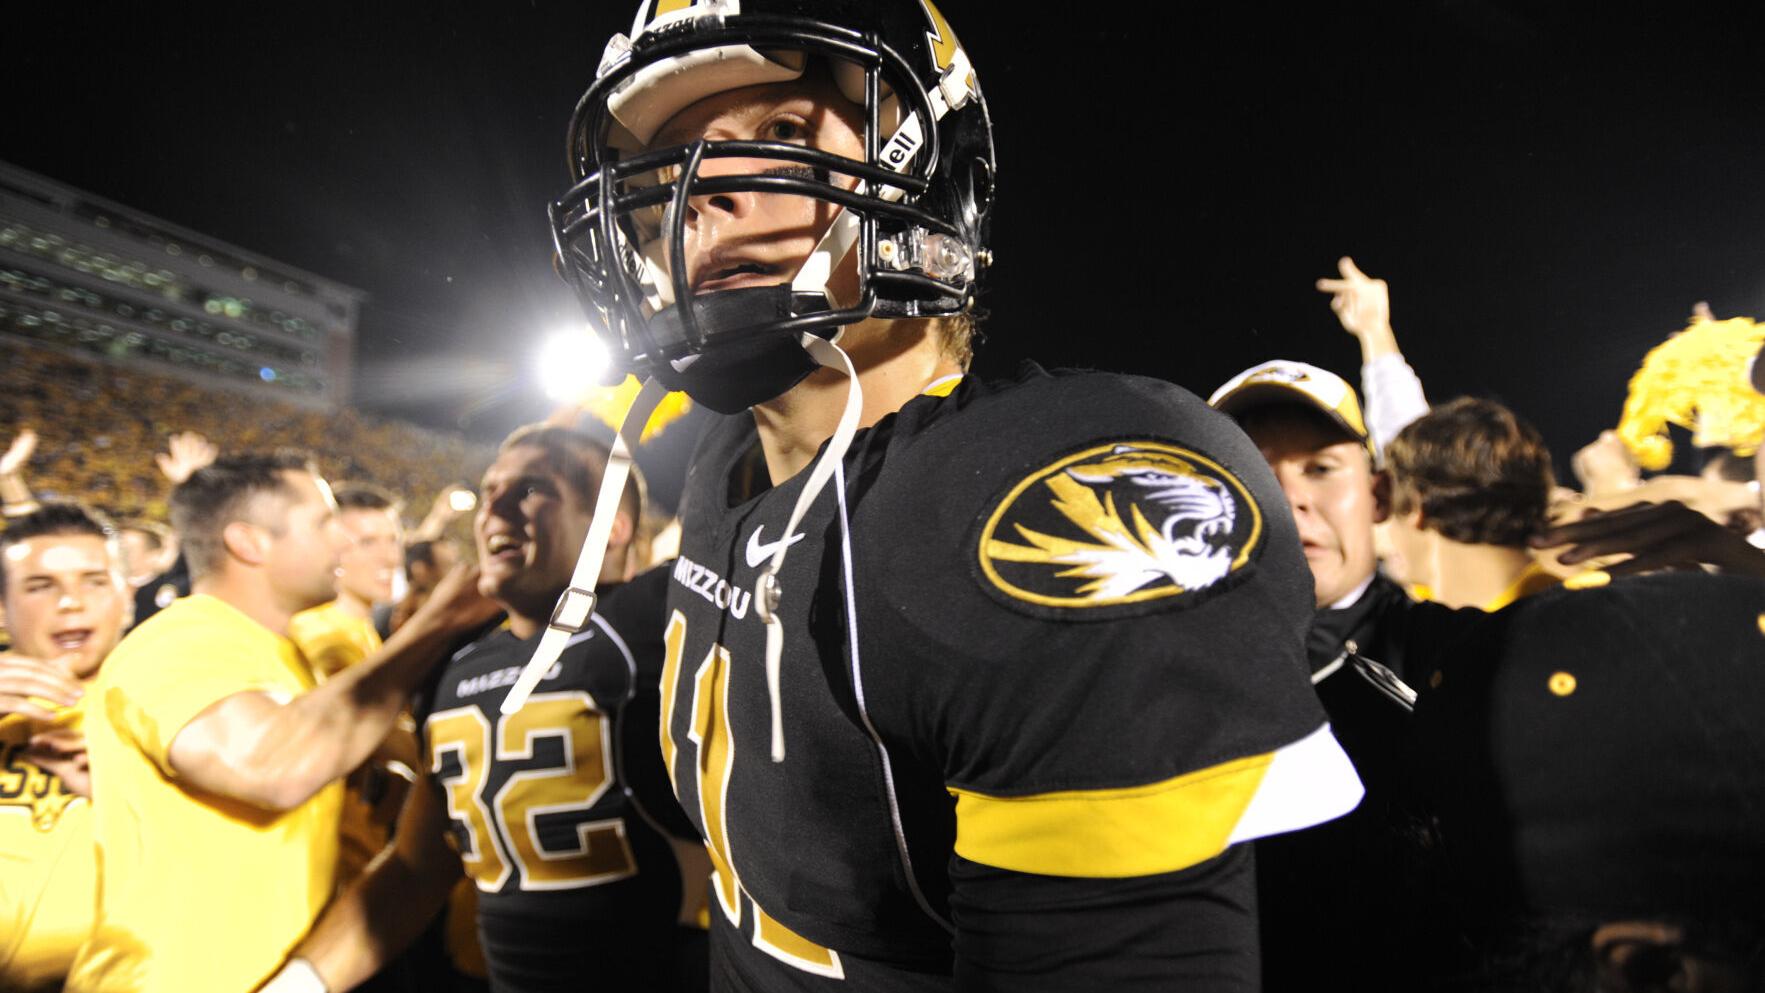 Brady Cook joins impressive line of Mizzou starting QBs from St. Louis area